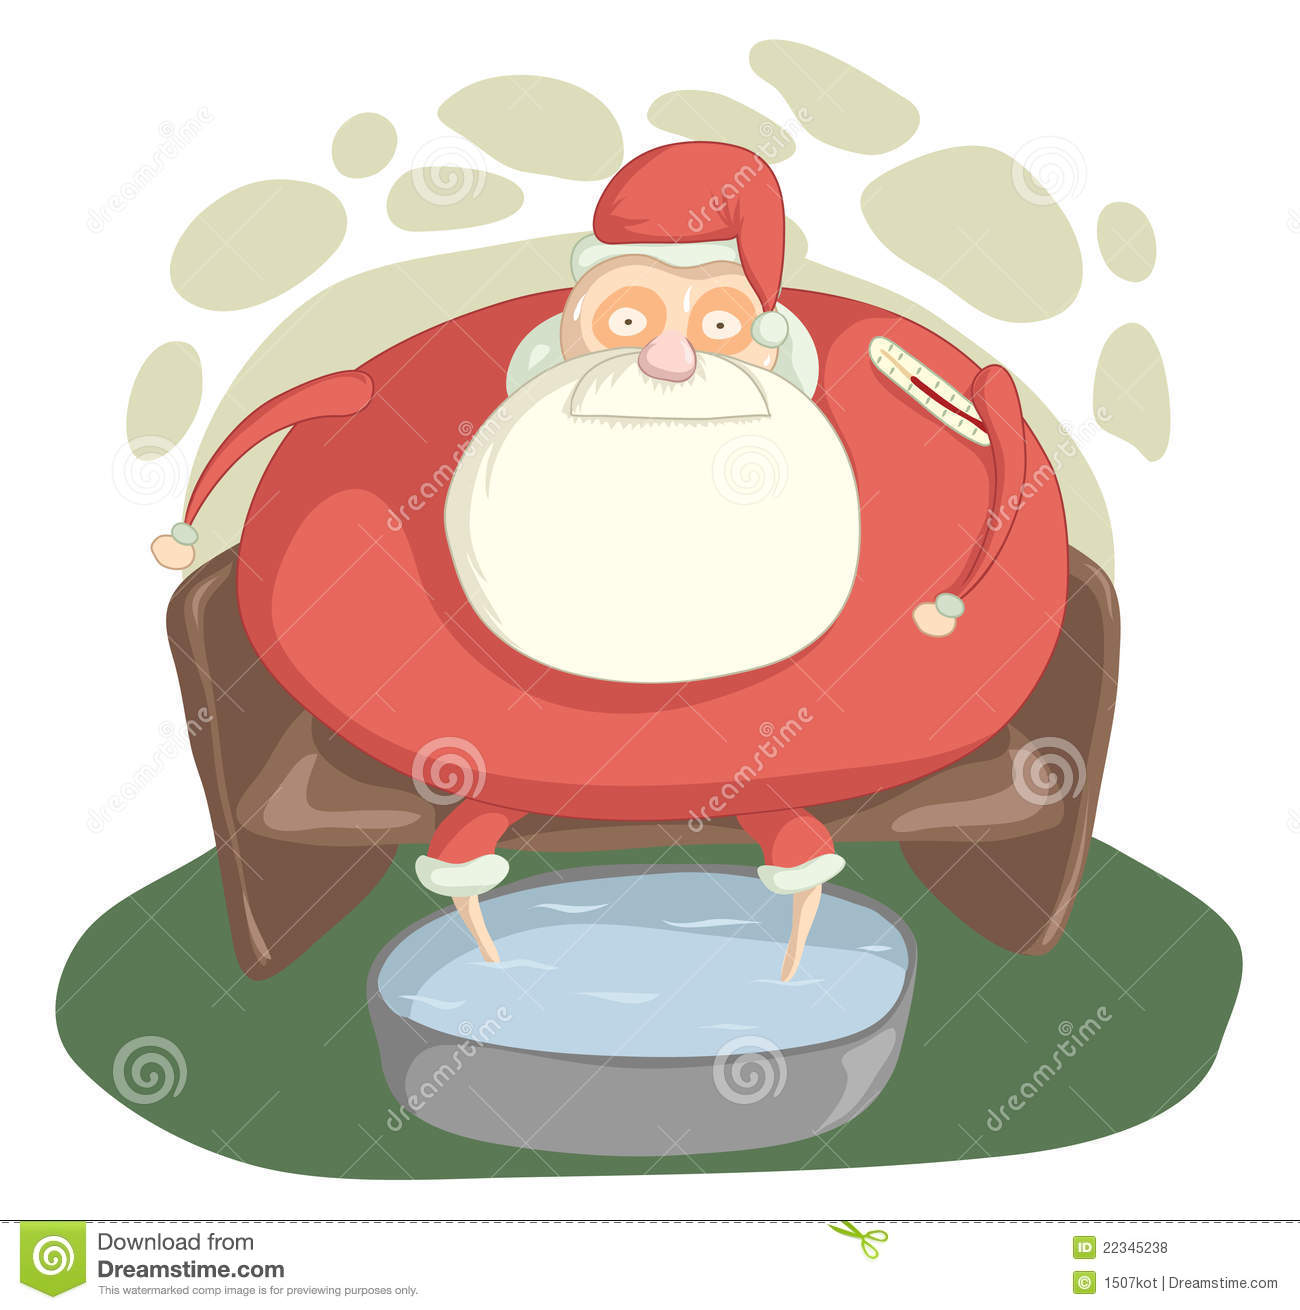 Santa Claus With A High Temperature Is Sitting In A Chair And Floating